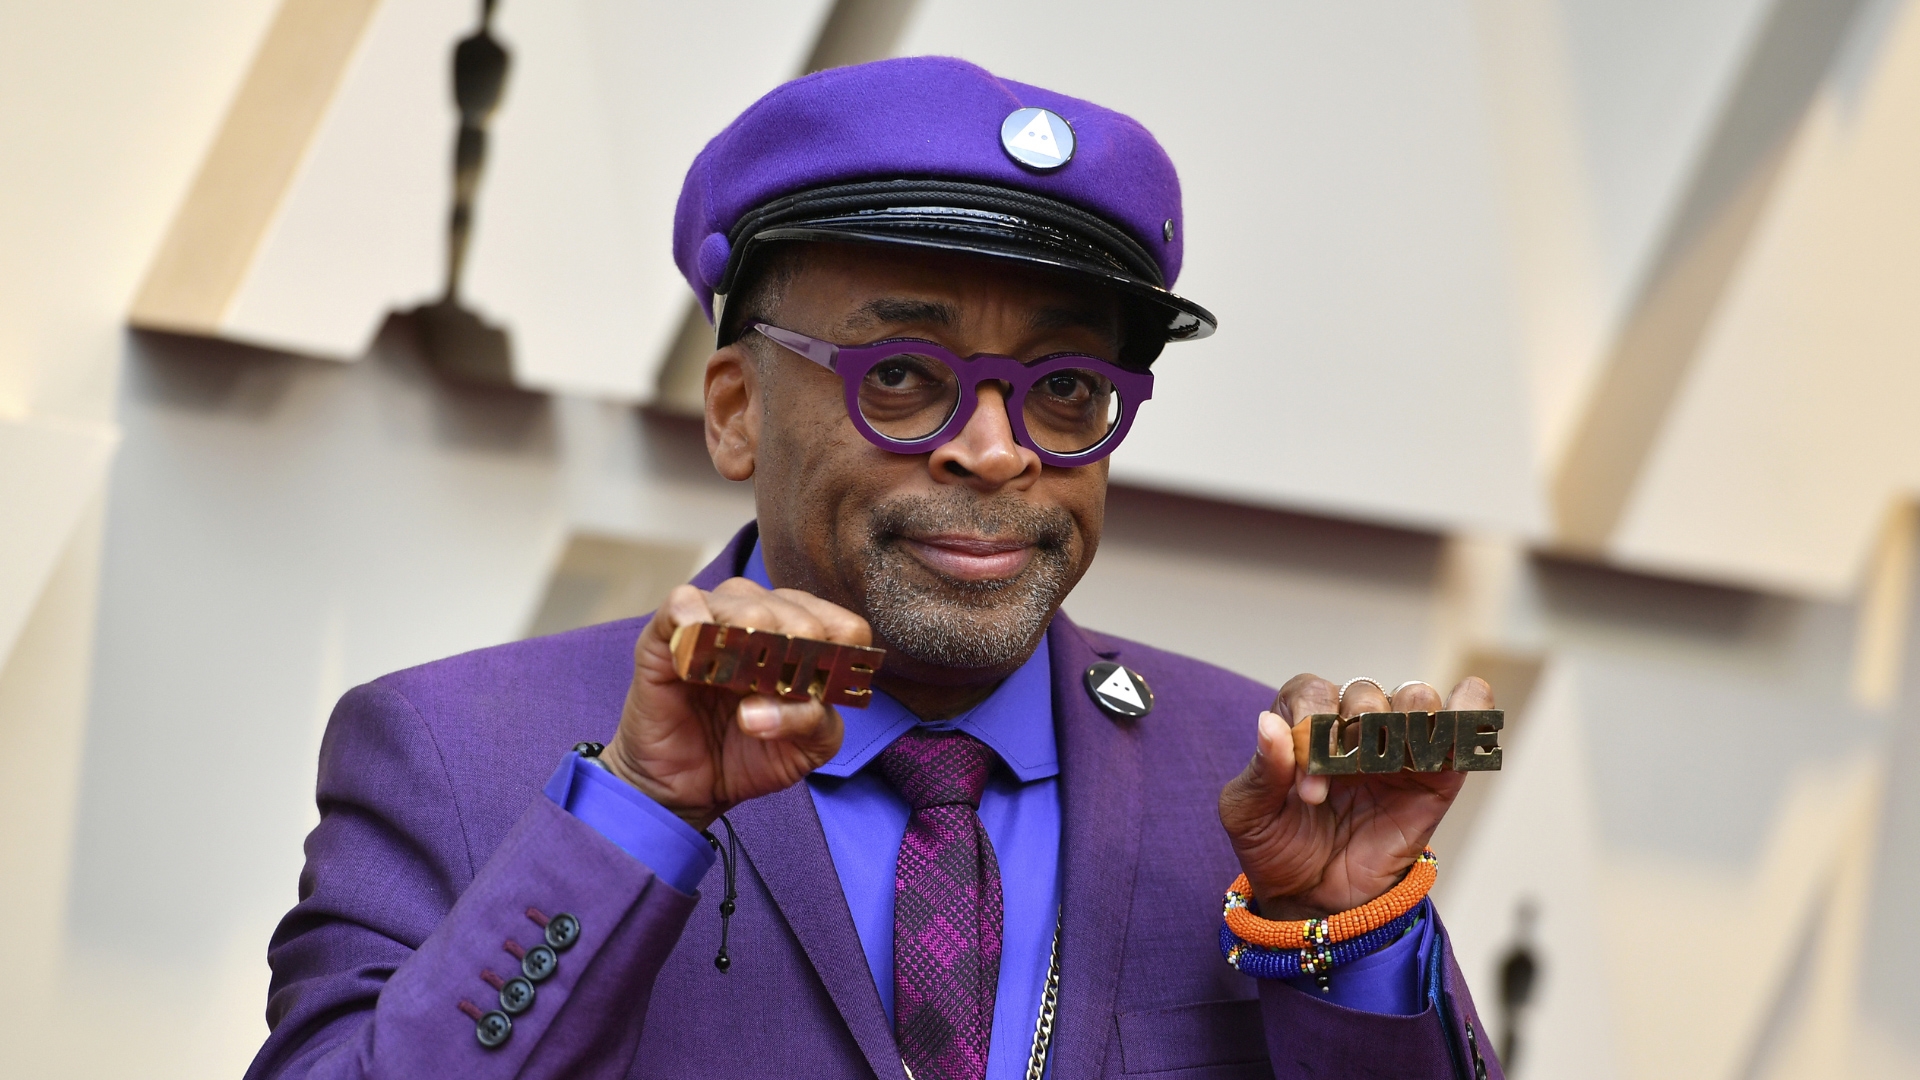 https://media.nbcnewyork.com/2023/04/190224_3912551_2019_Oscars__Spike_Lee_Delivers_The_Most_Pol_1920x1080_2191066179522.jpg?quality=85&strip=all&fit=1920%2C1080